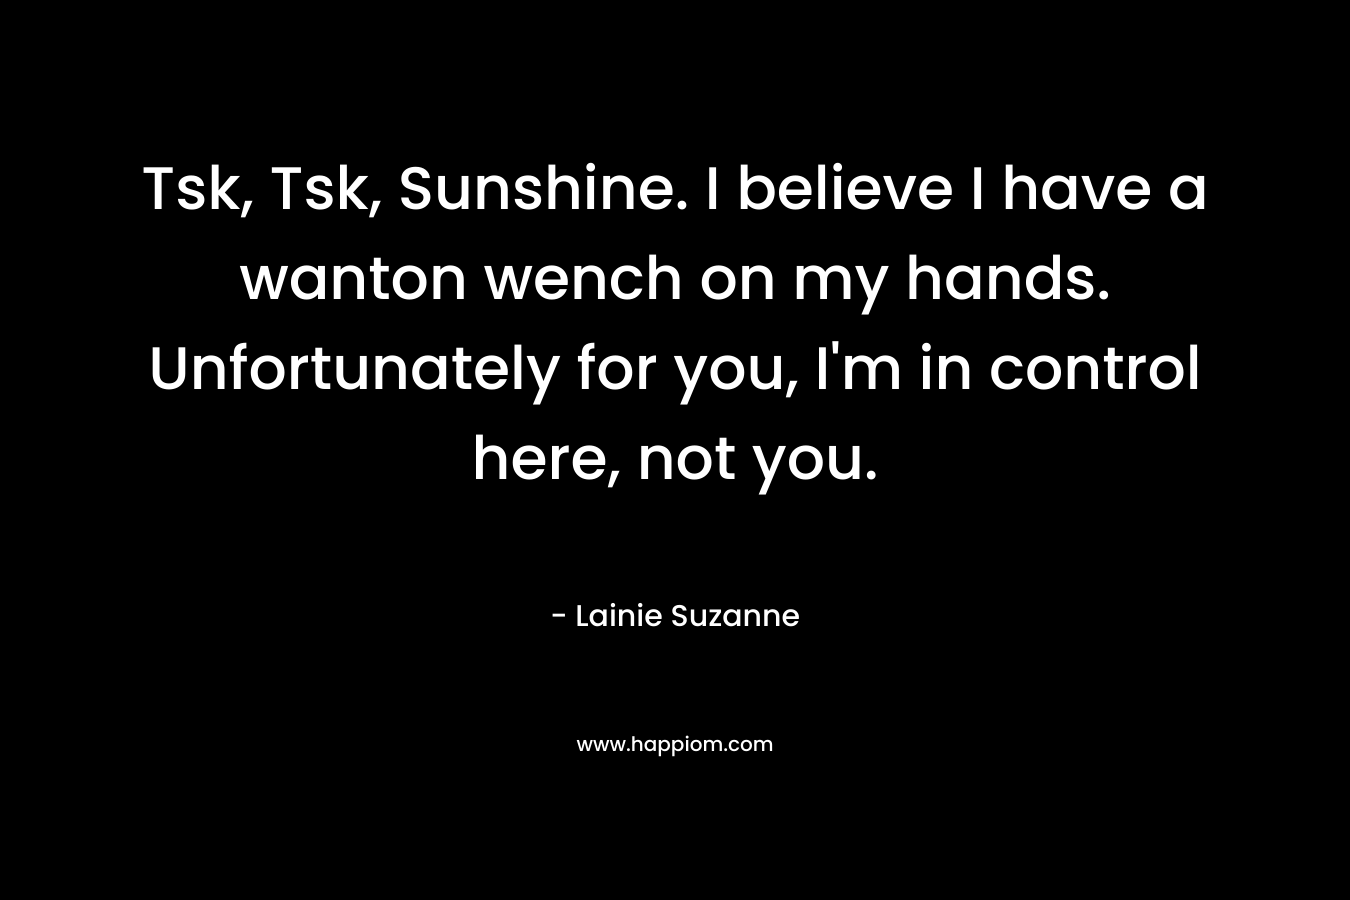 Tsk, Tsk, Sunshine. I believe I have a wanton wench on my hands. Unfortunately for you, I'm in control here, not you.